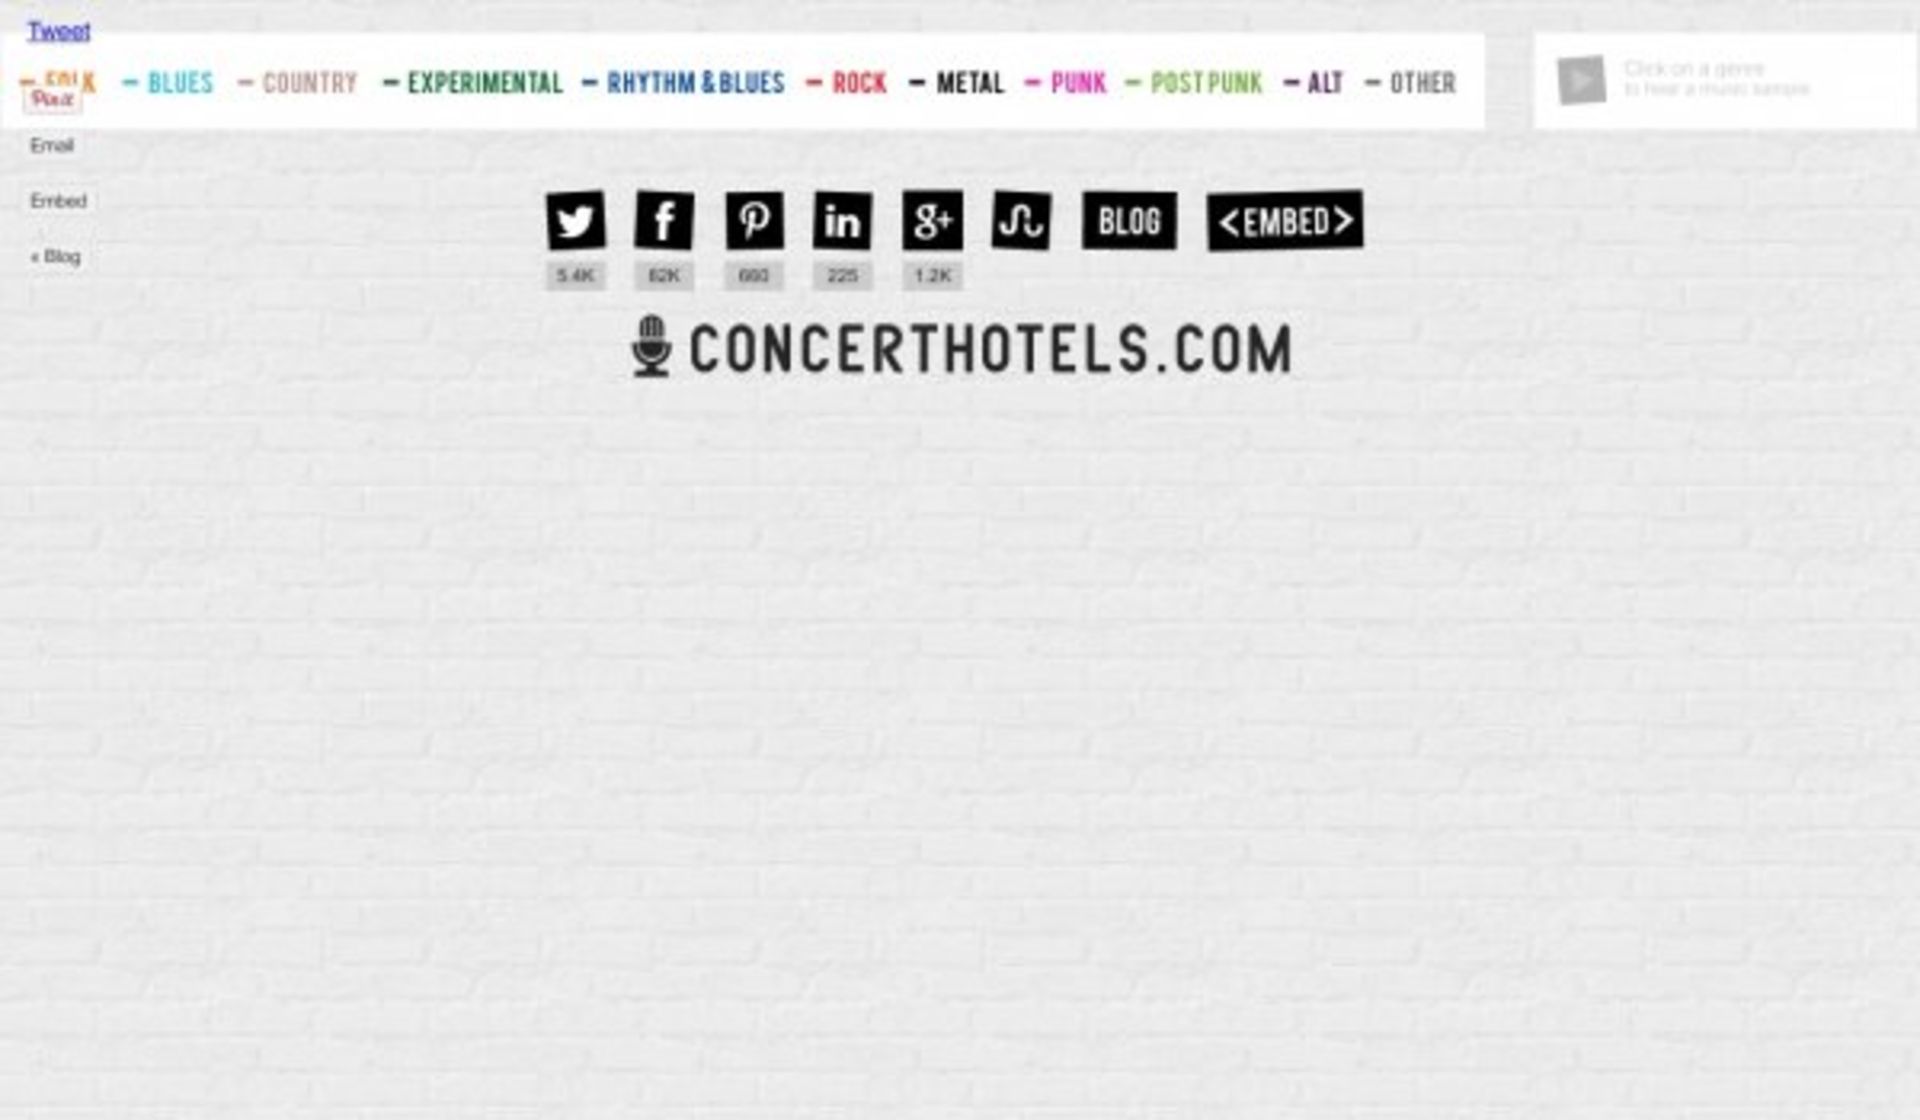 http  www.concerthotels.com 100-years-of-rock